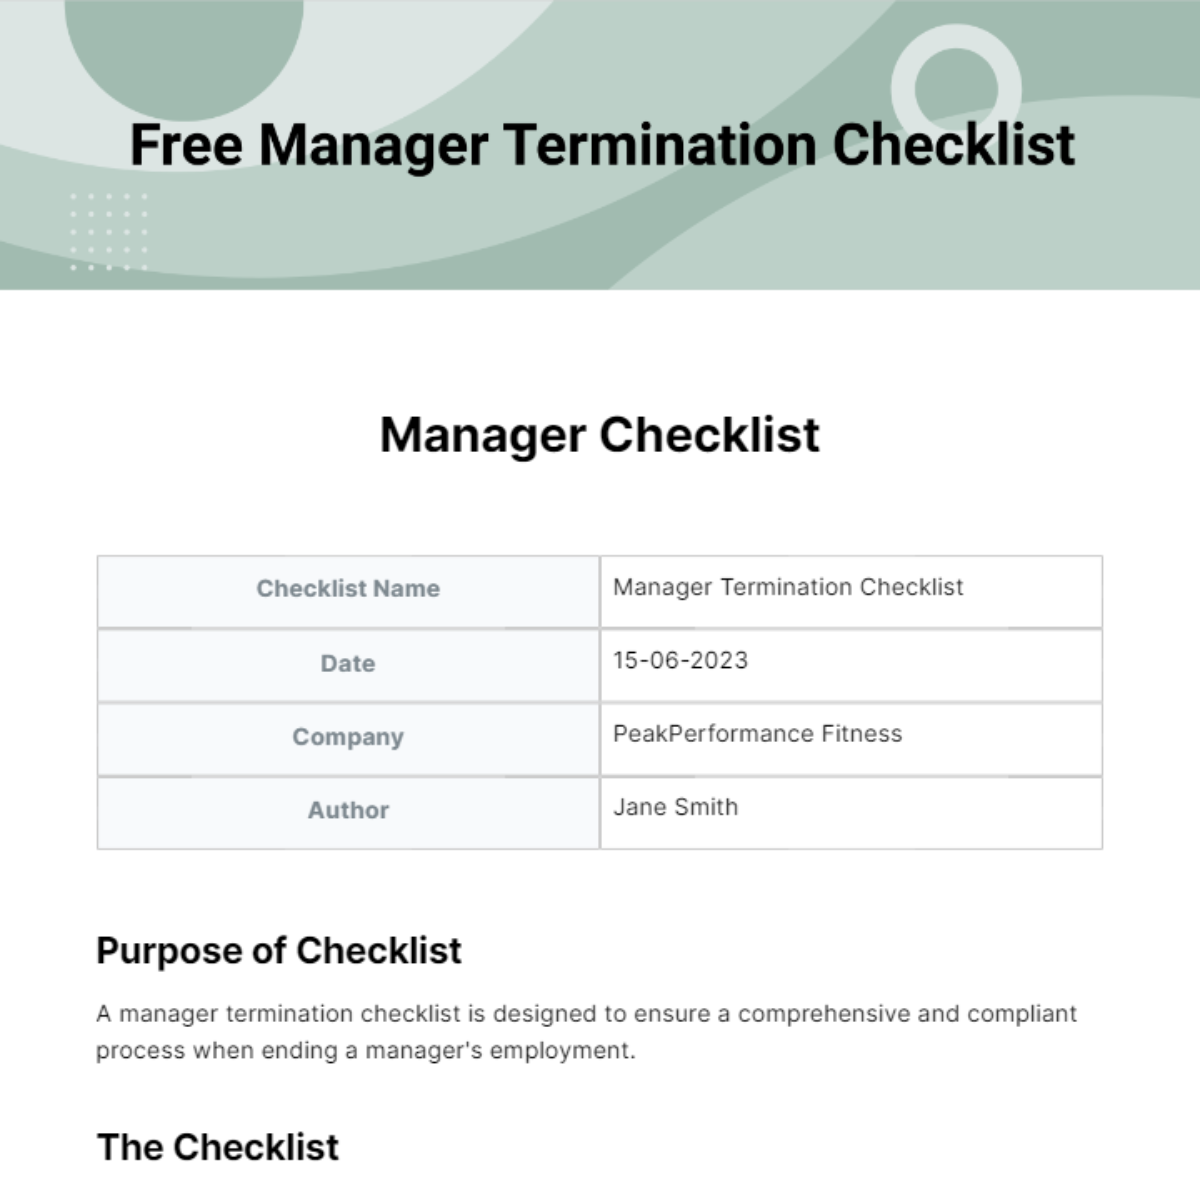 FREE Manager Checklist - Edit Online & Download | Template.net